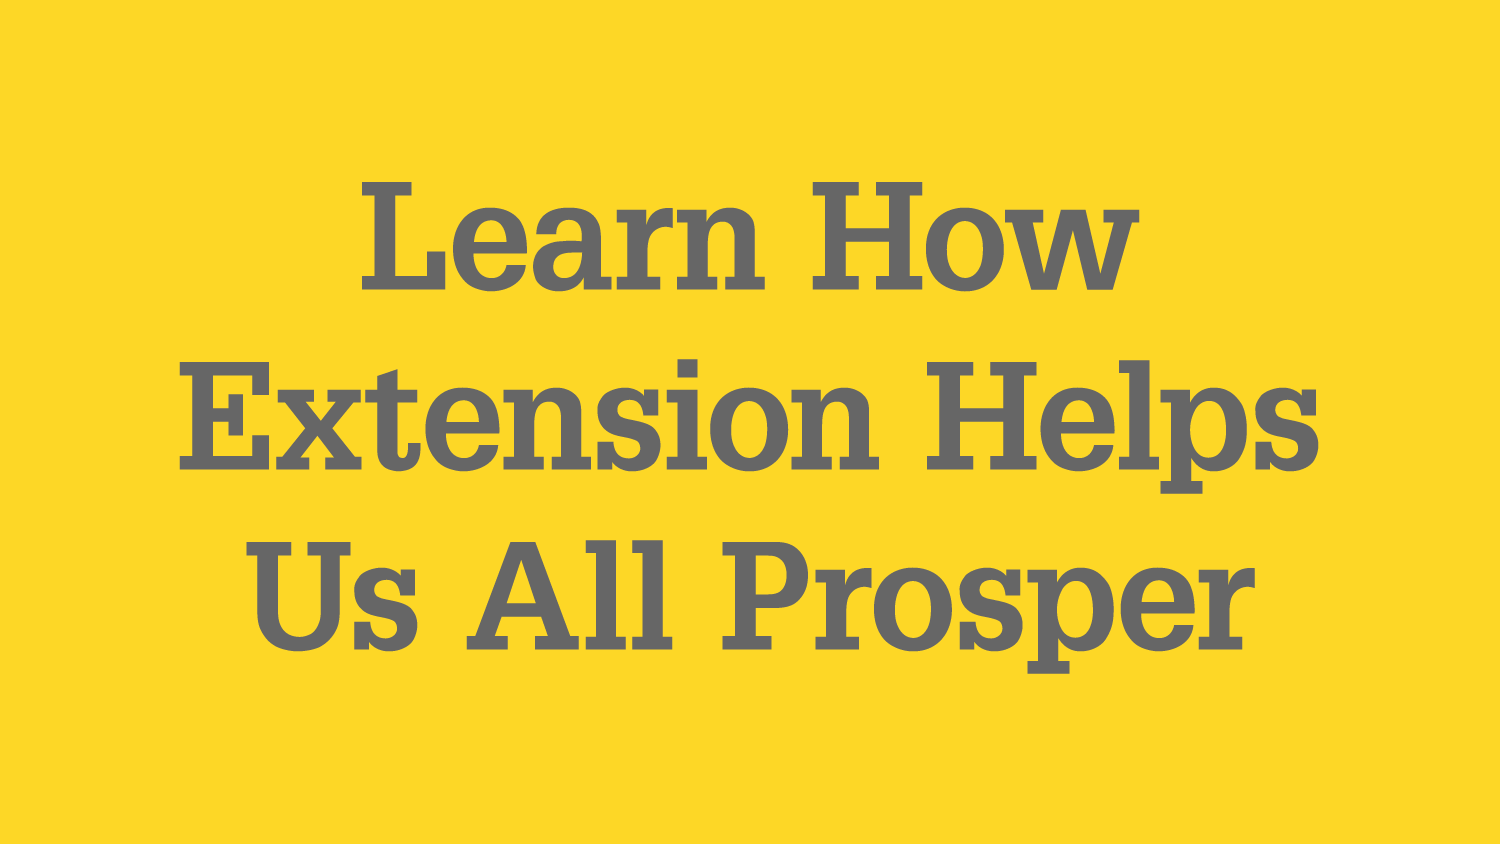 Graphic with text "Learn how Extension helps us all prosper"